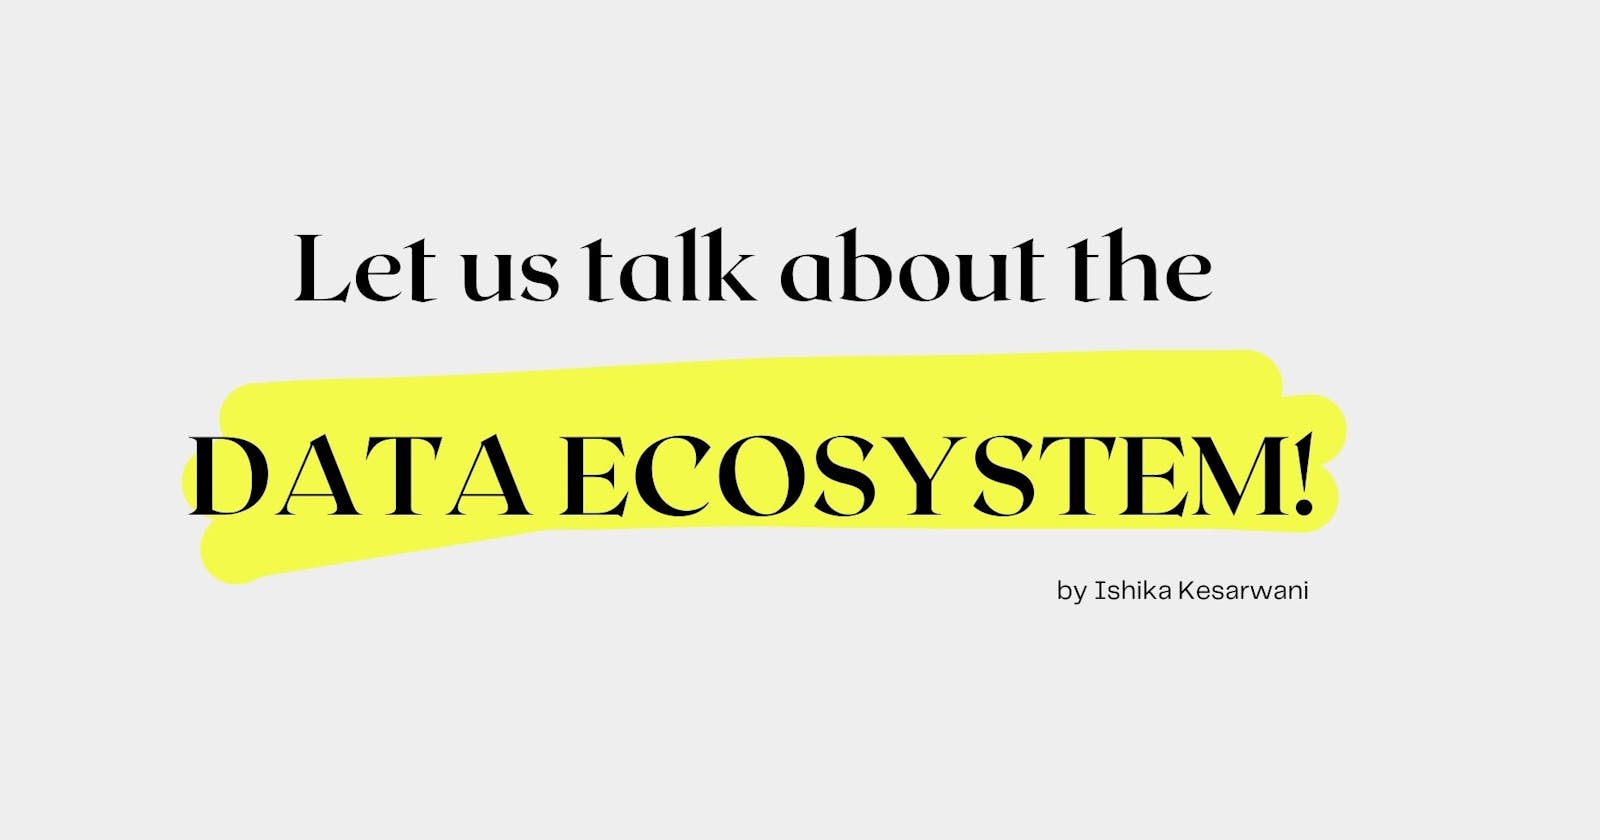 Let us talk about the DATA ECOSYSTEM!